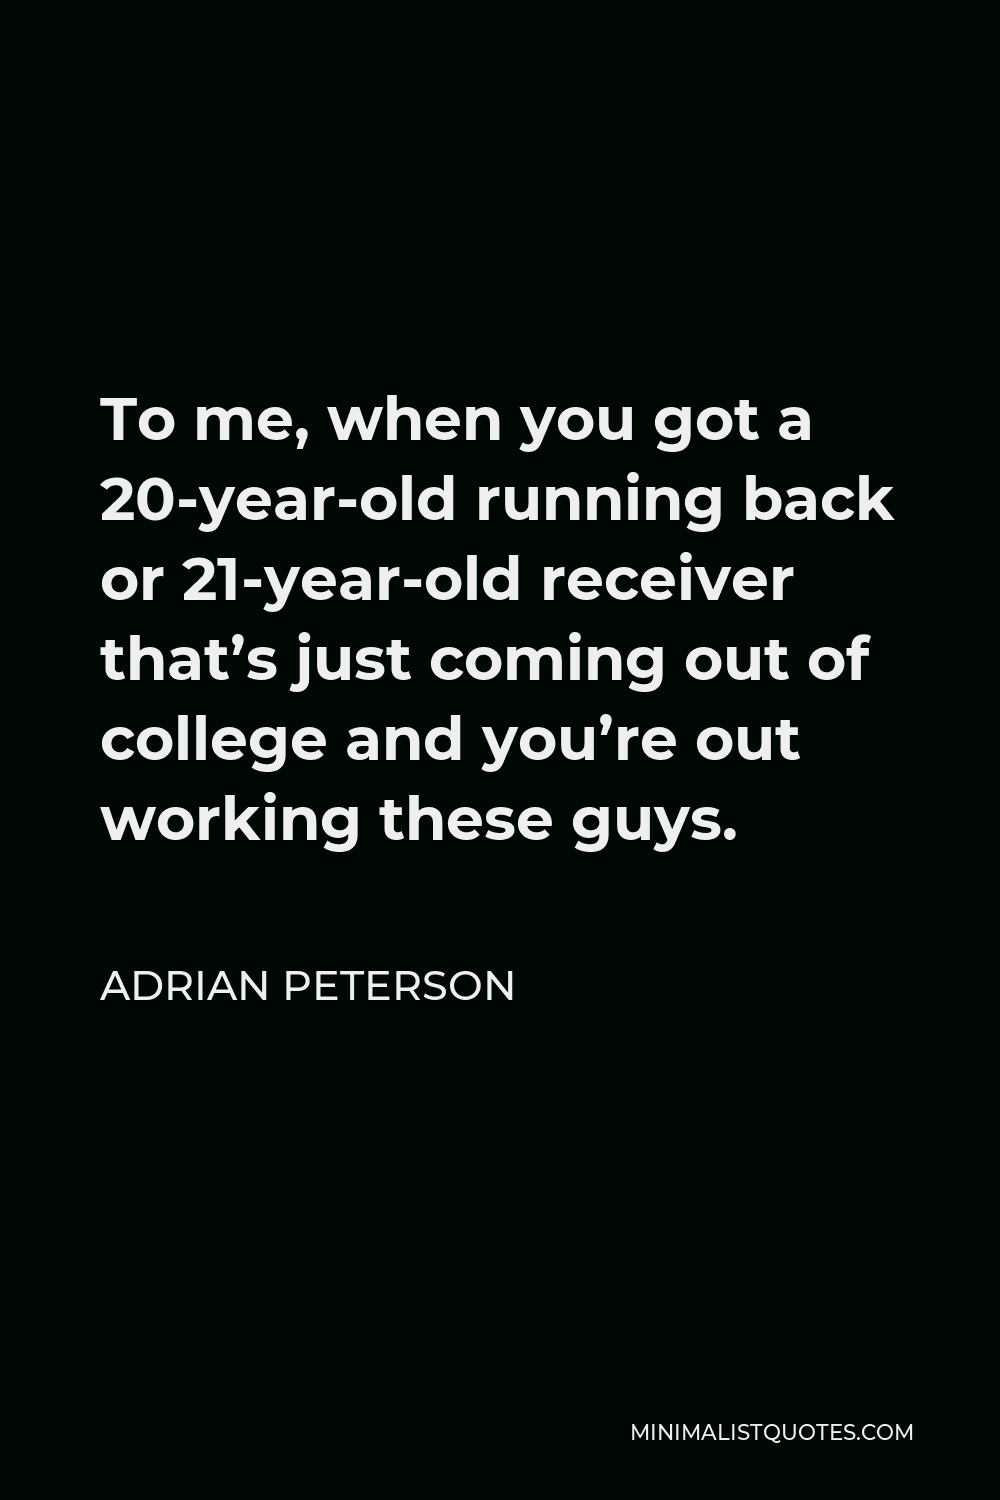 Adrian Peterson Quote - To me, when you got a 20-year-old running back or 21-year-old receiver that’s just coming out of college and you’re out working these guys.